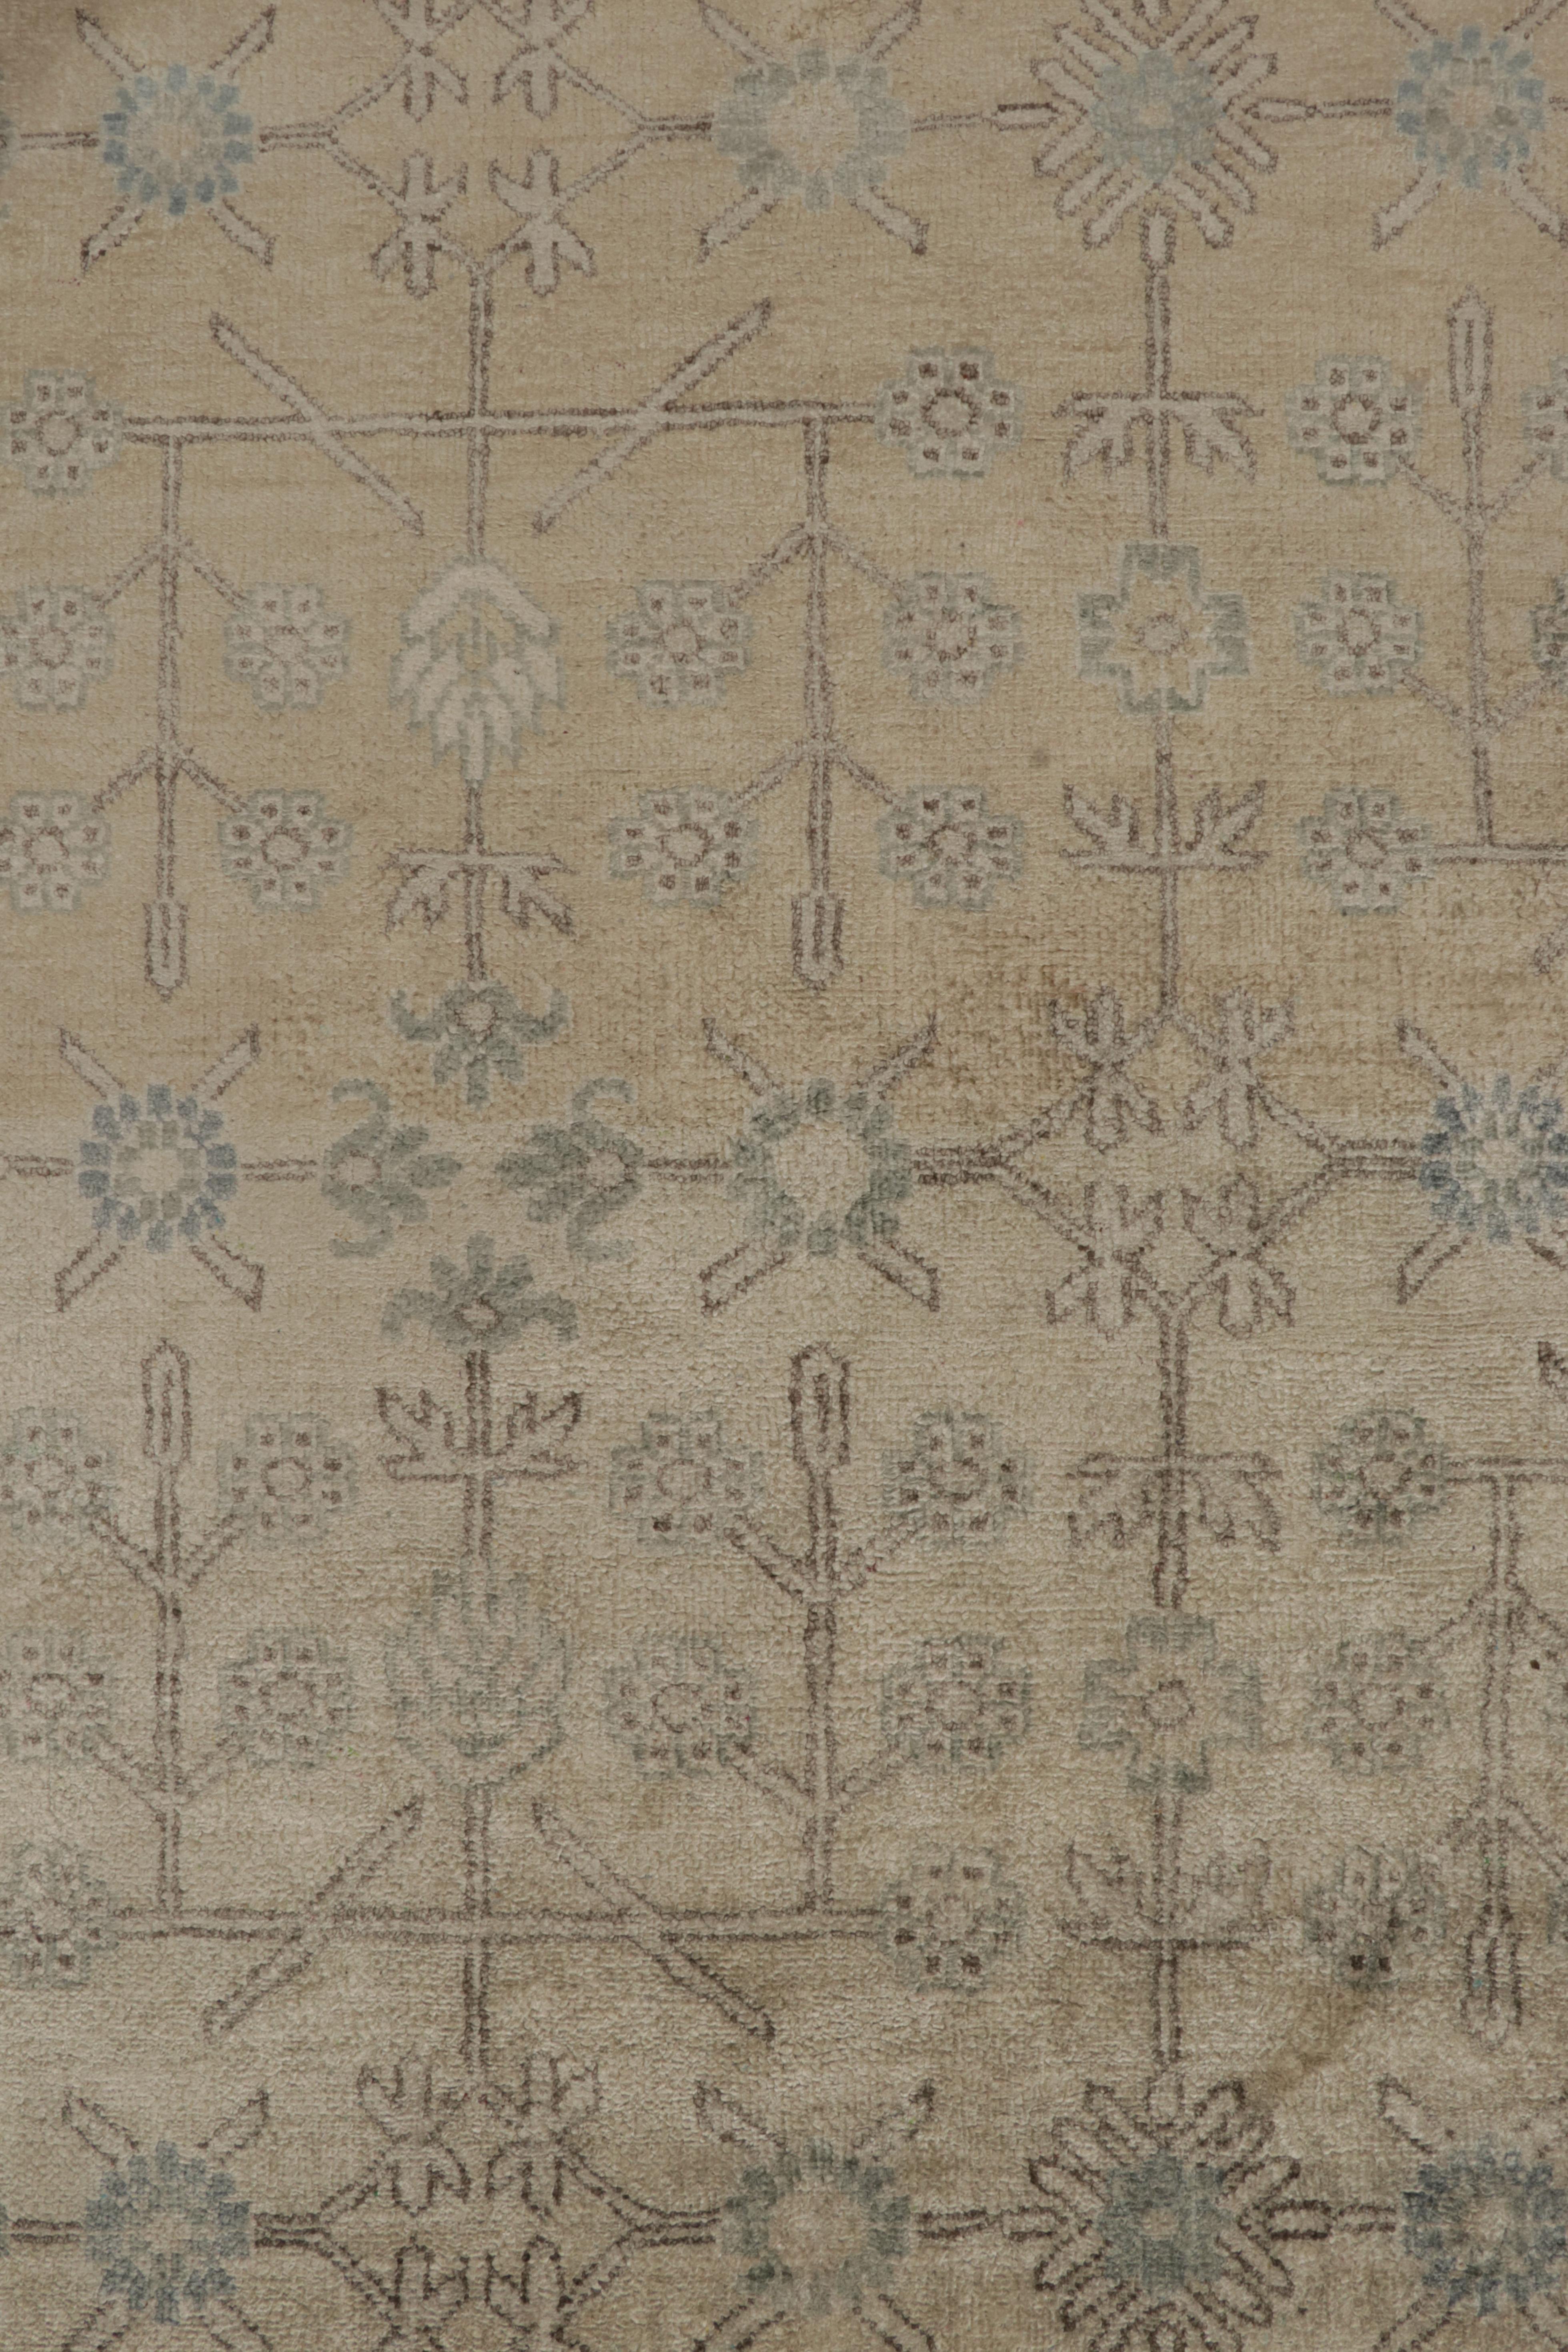 Contemporary Rug & Kilim’s Khotan style Rug in Ivory with White & Blue Floral Patterns For Sale